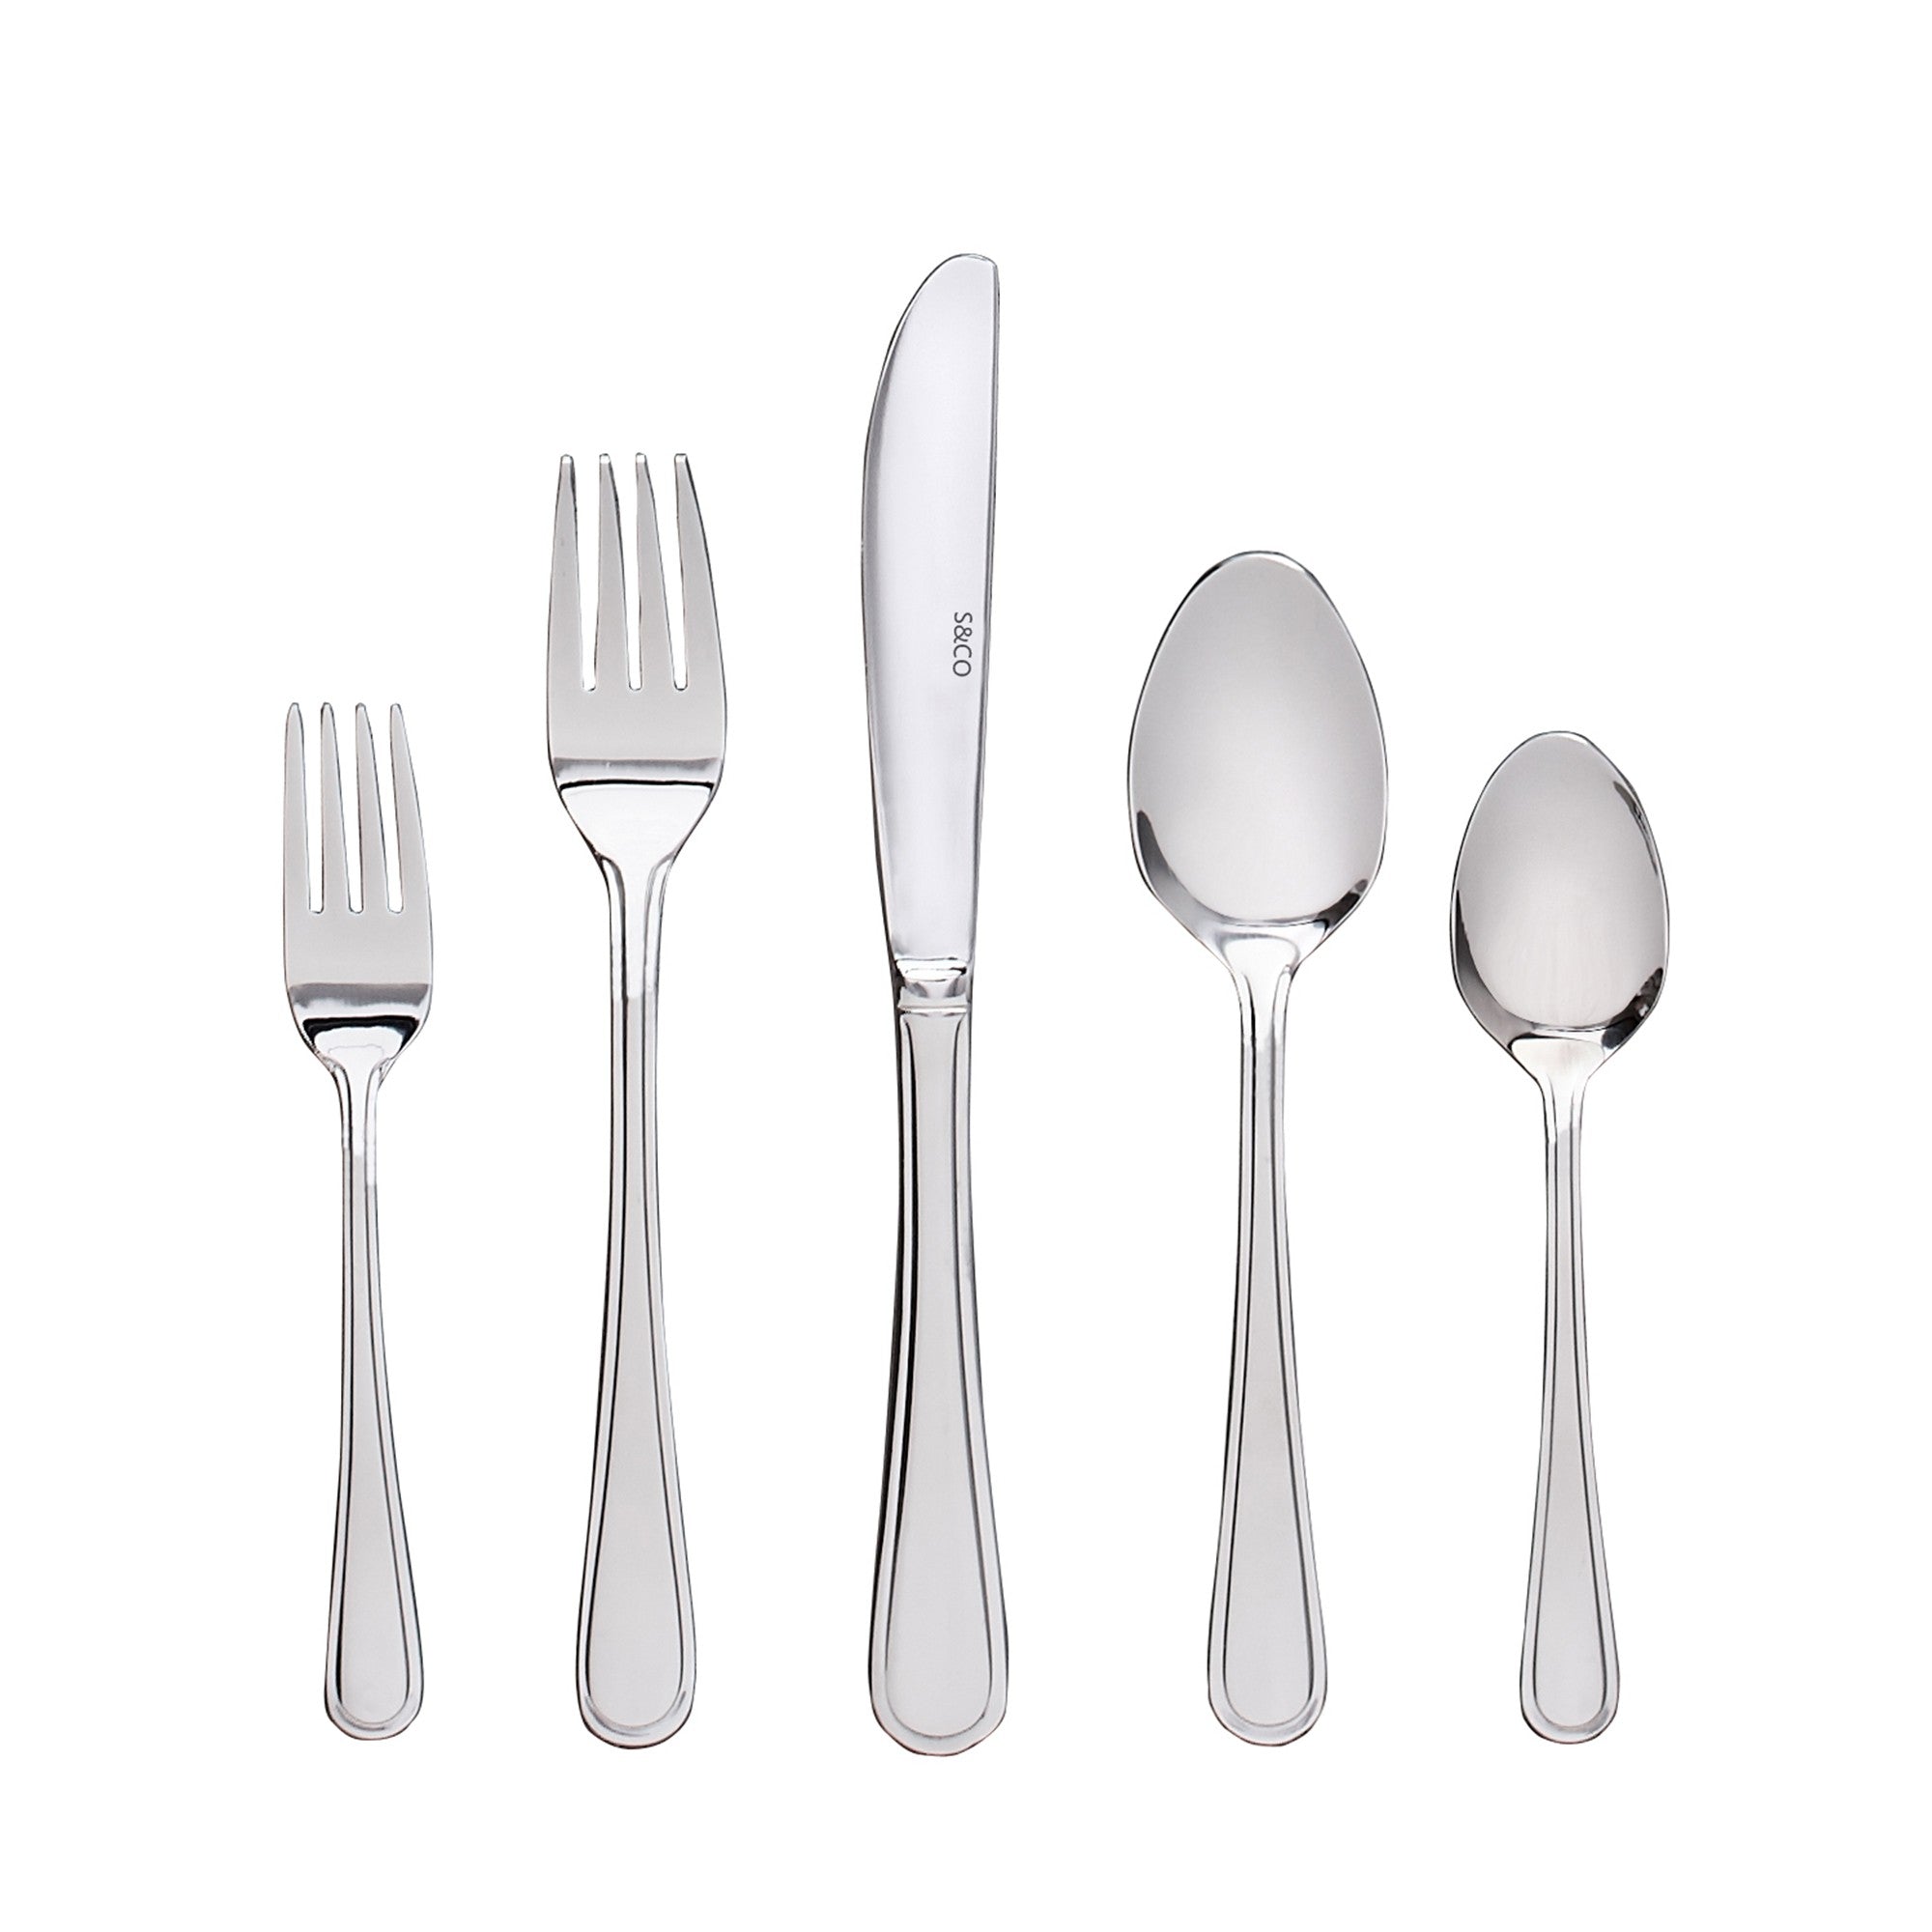 title:Safdie & Co. Flatware Stainless Steel Gourmet 20PC Set Kelby;color:Silver